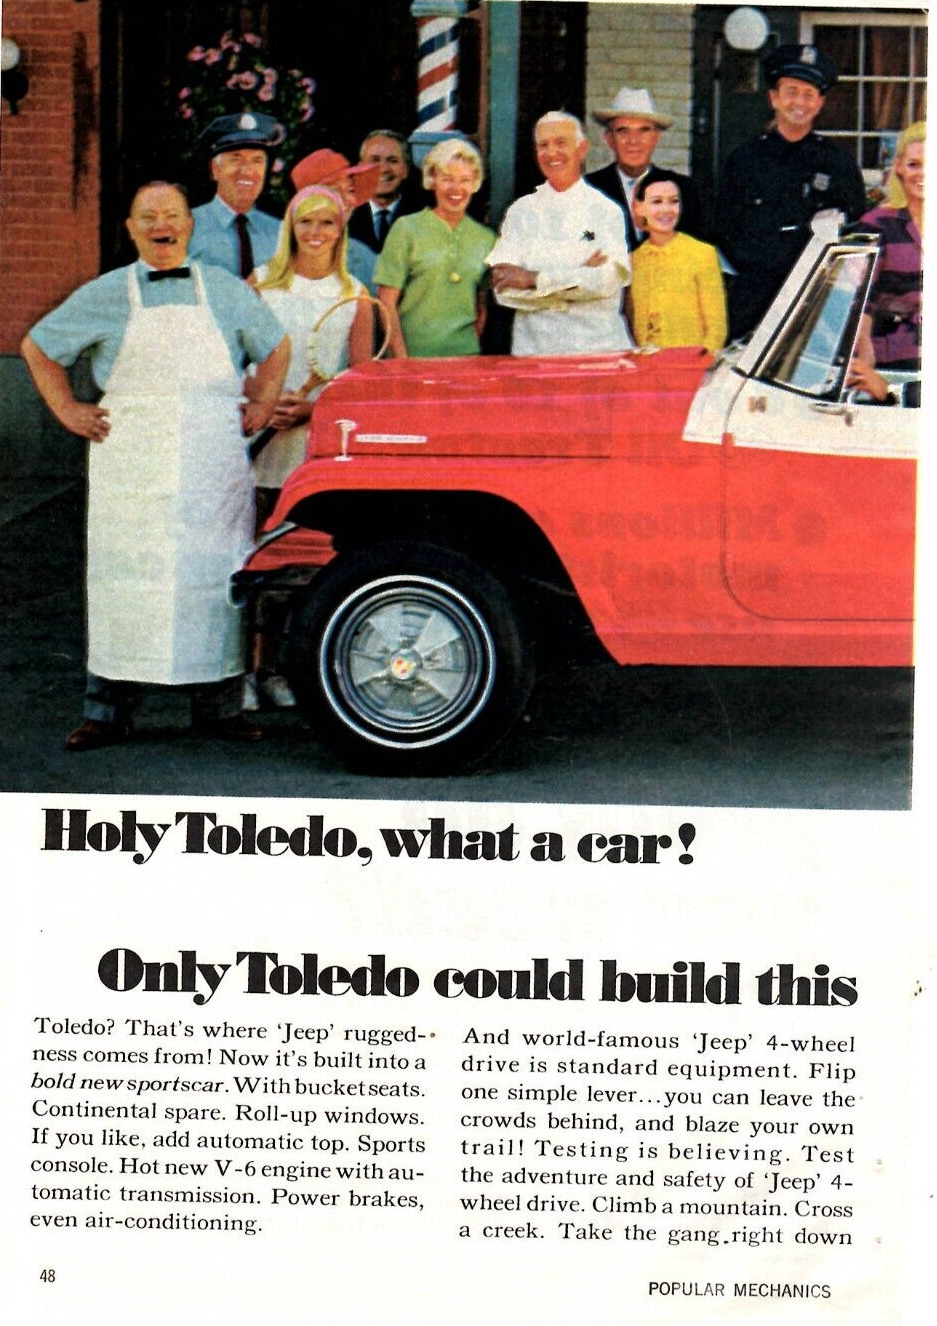 1967 Print Ad Kaiser Jeep Jeepster Holy Toledo What a car Rugged Rascal Build